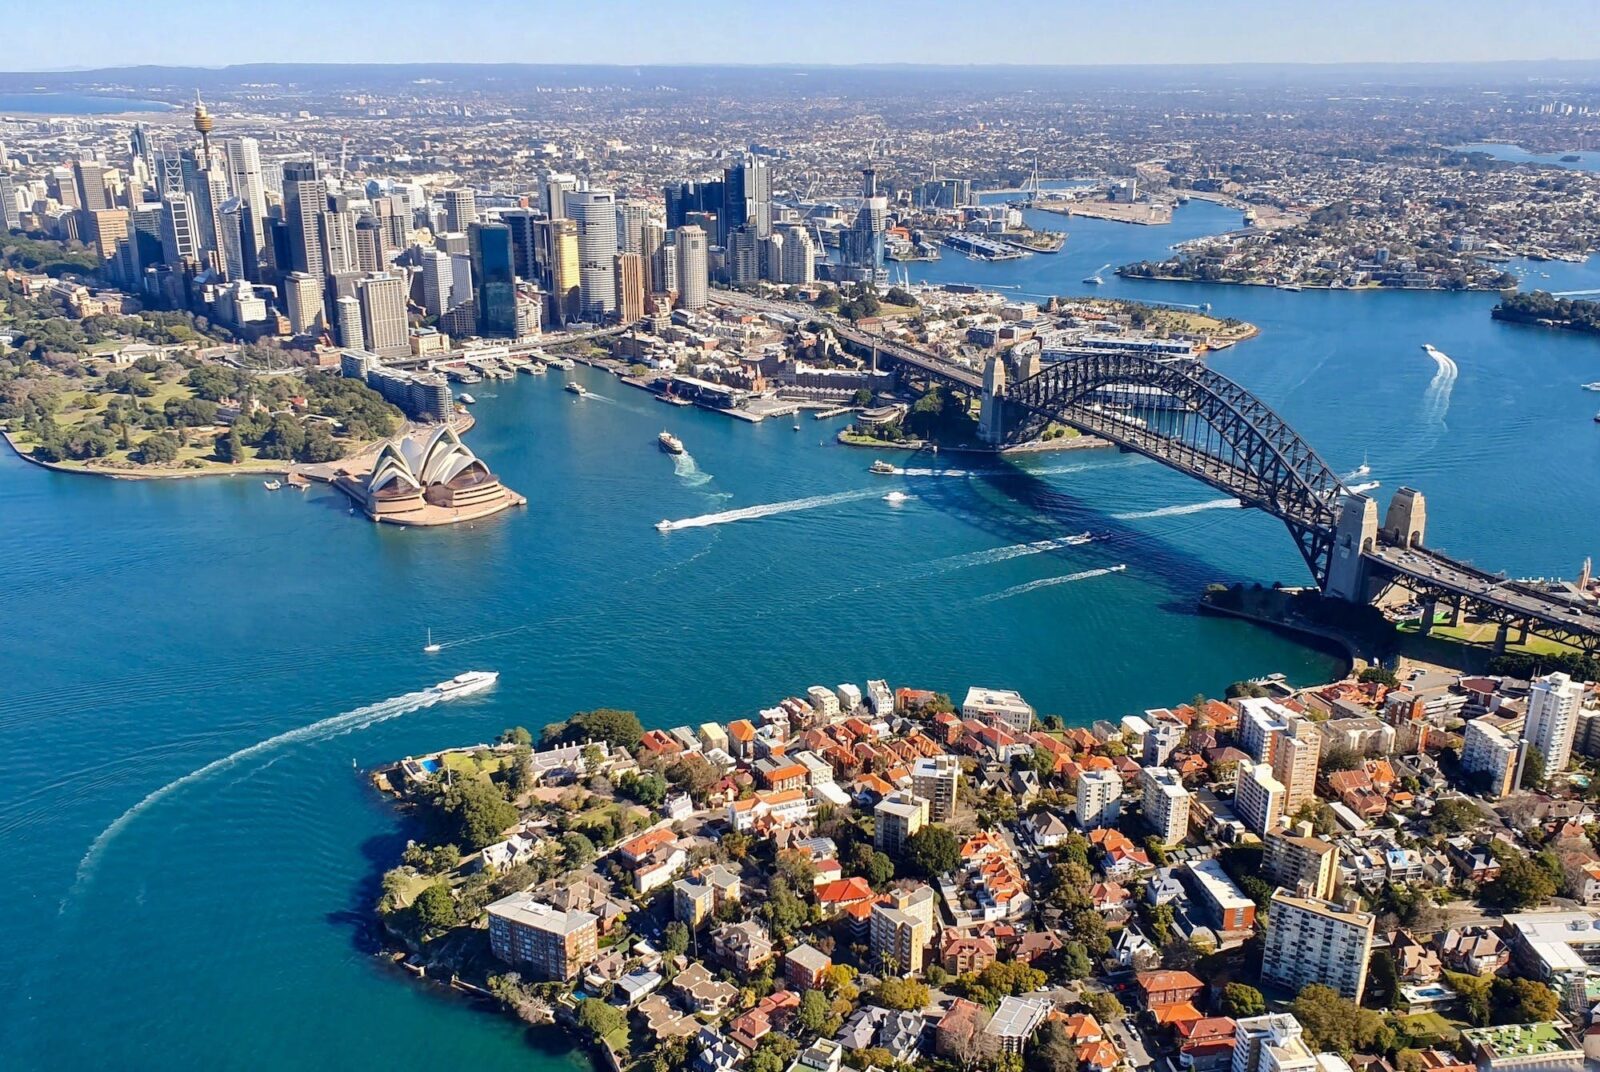 Sydney Harbour and Bridge from the sky